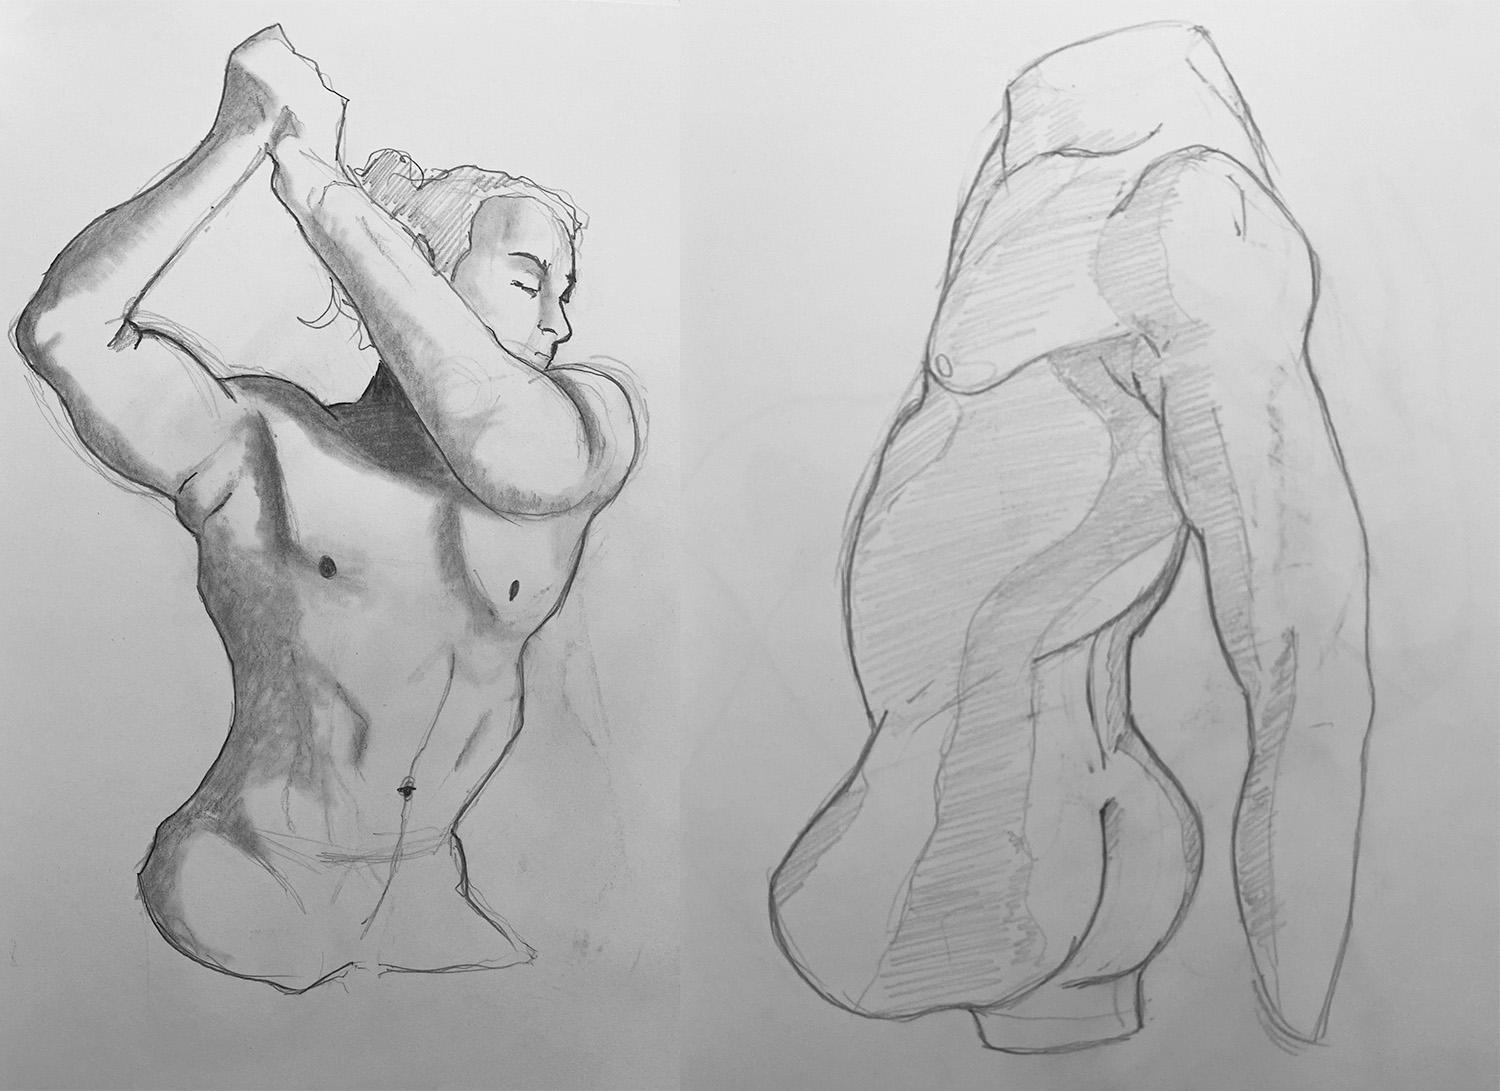 A life drawing sketch by Adam Westbrook